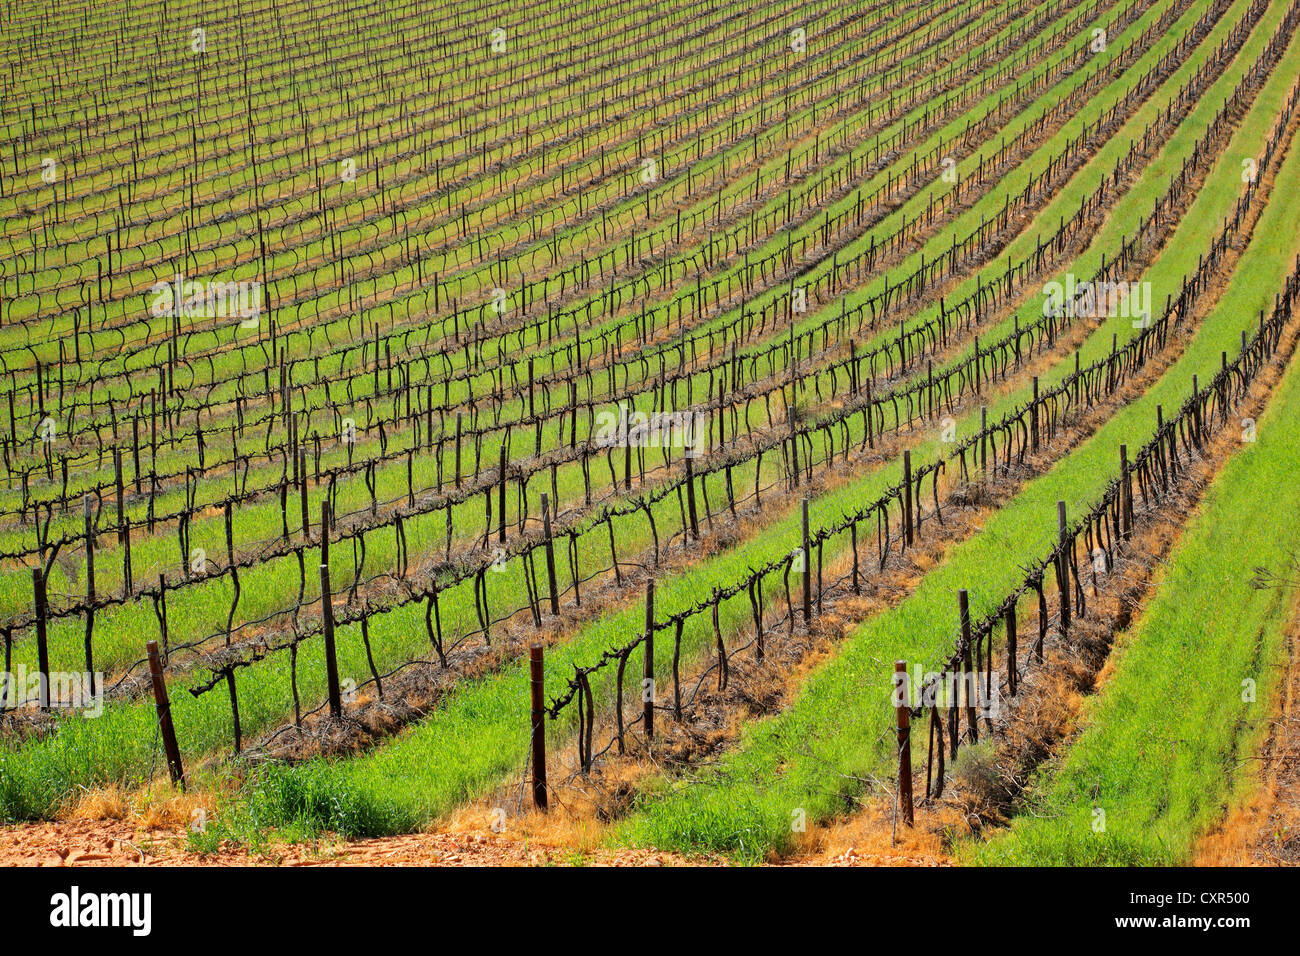 Rows of vines and green grass of a vineyard, Cape Town area, South Africa Stock Photo